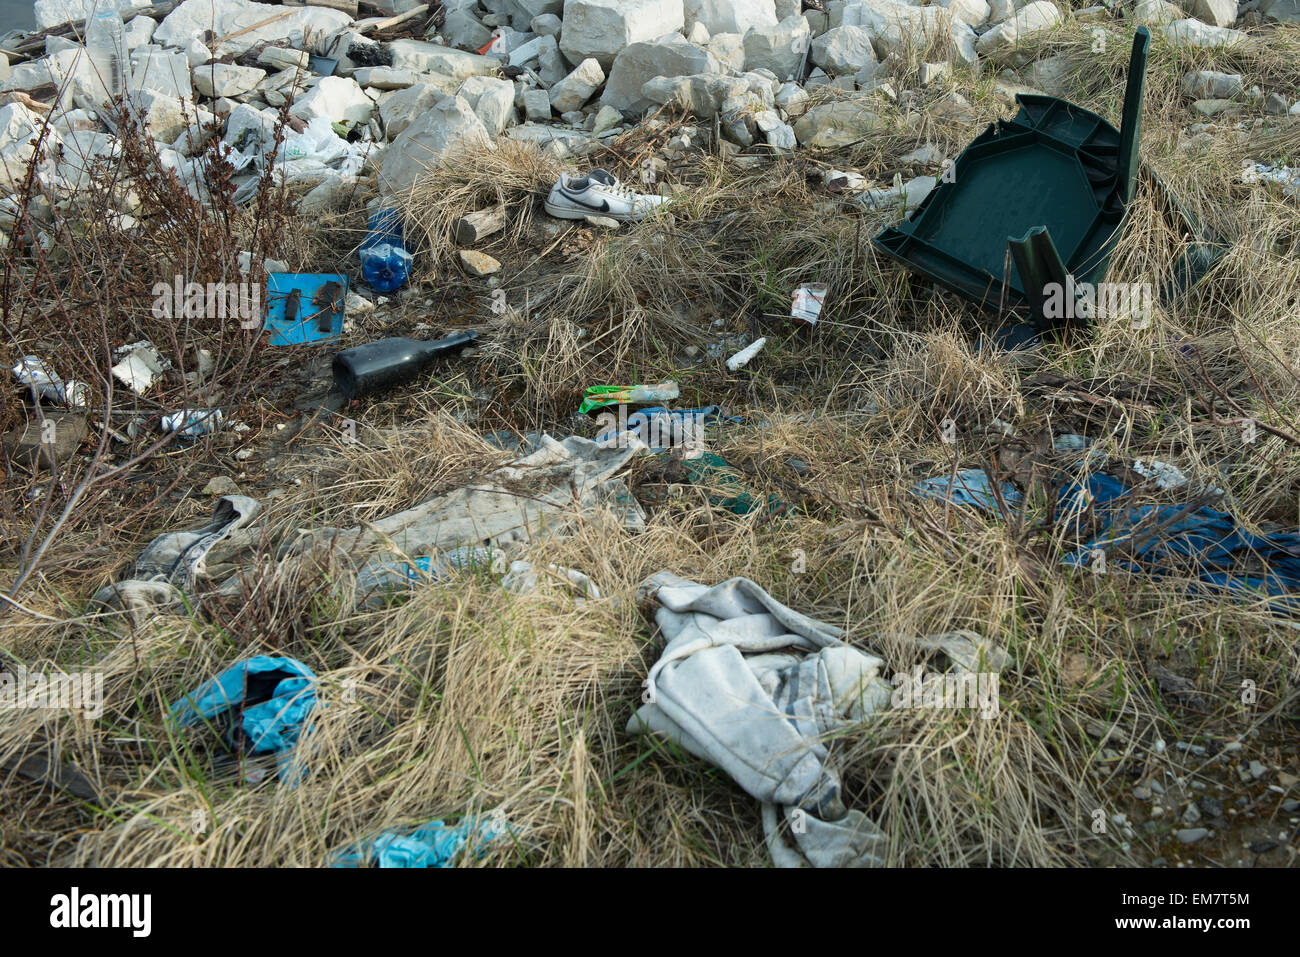 garbage abandoned in a field Stock Photo